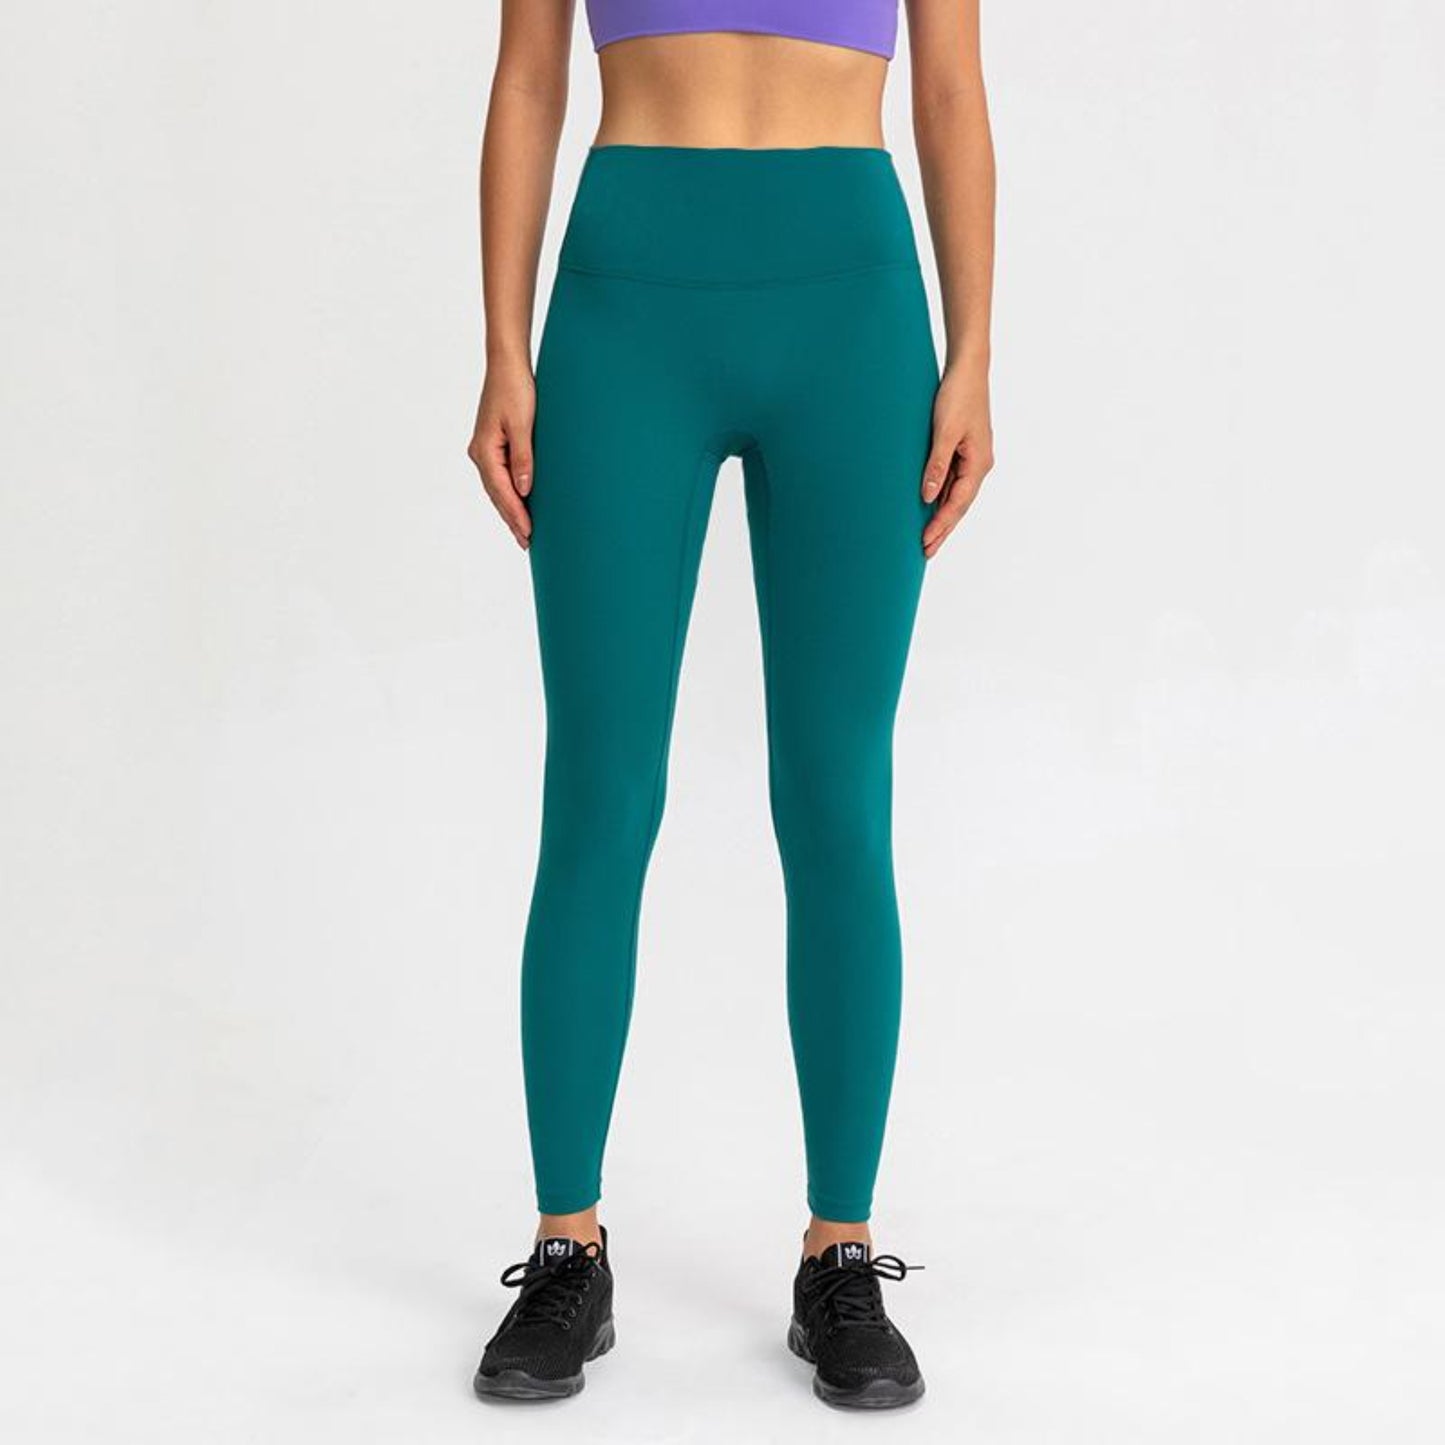 OCEAN GREEN, HIGH RISE AND SQUAT PROOF LEGGINGS WORN BY MODEL ON A WHITE BACKGROUND